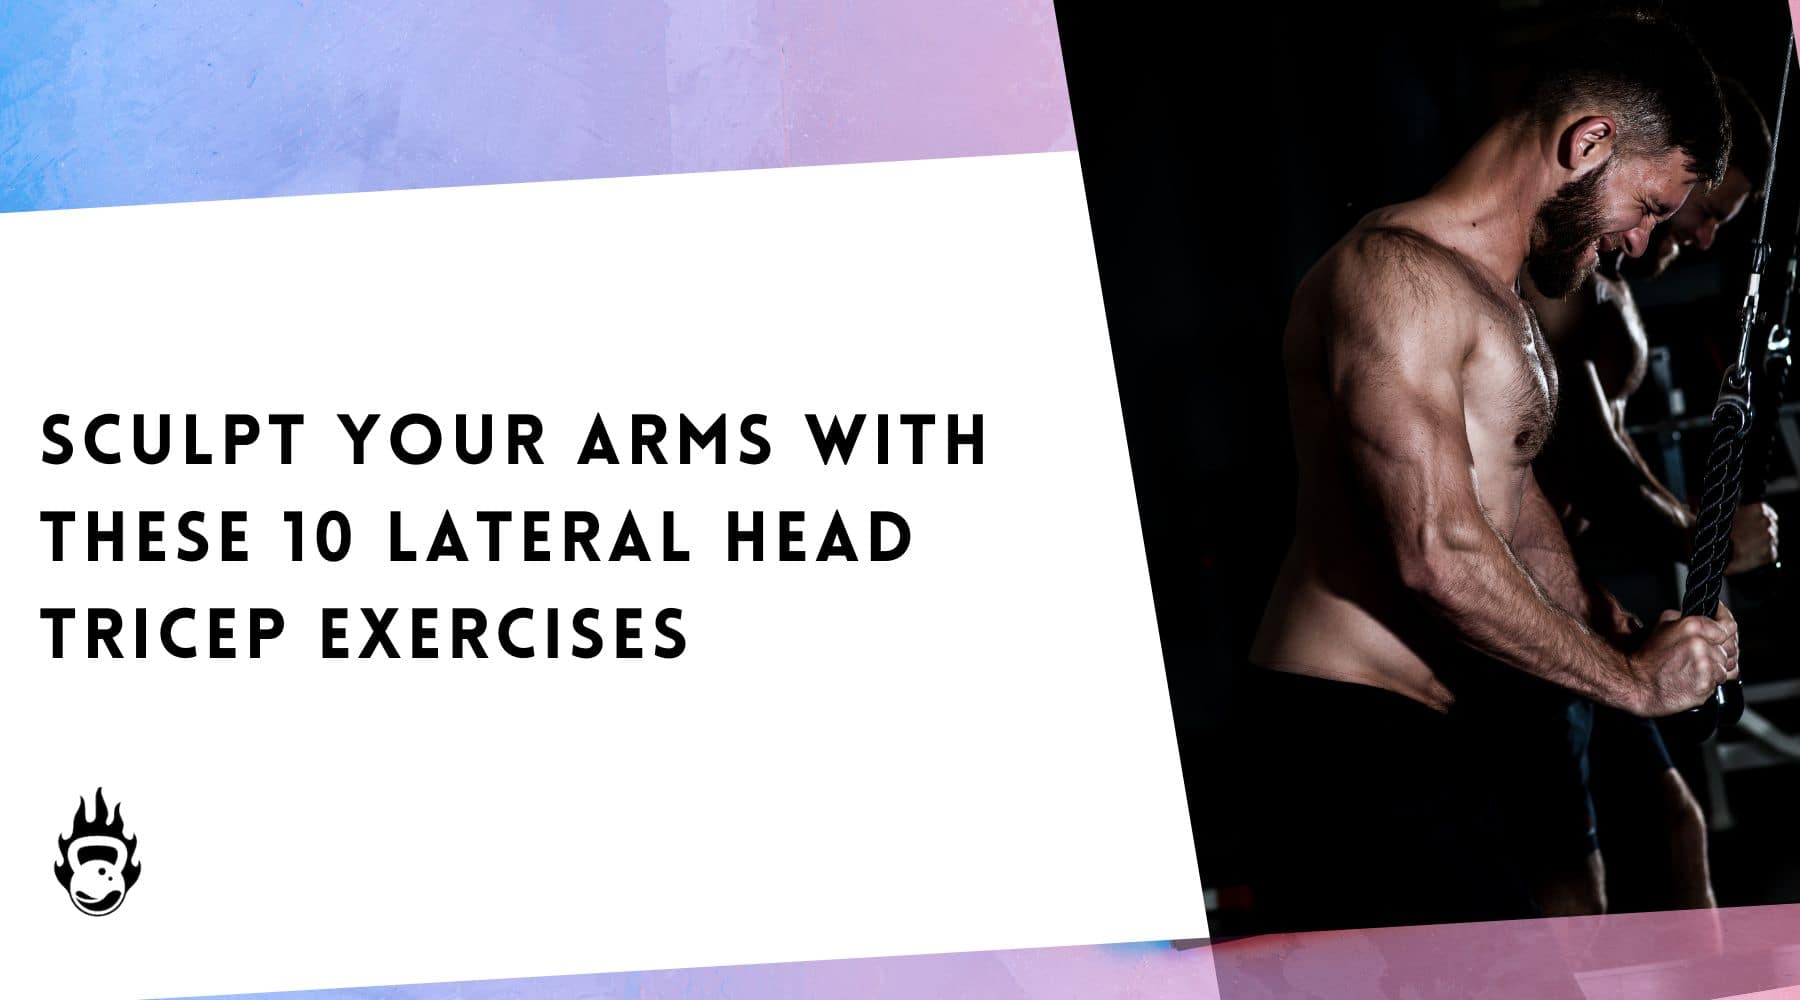 15 MIN TONED ARMS WORKOUT - With Weights, Upper Body Express, No